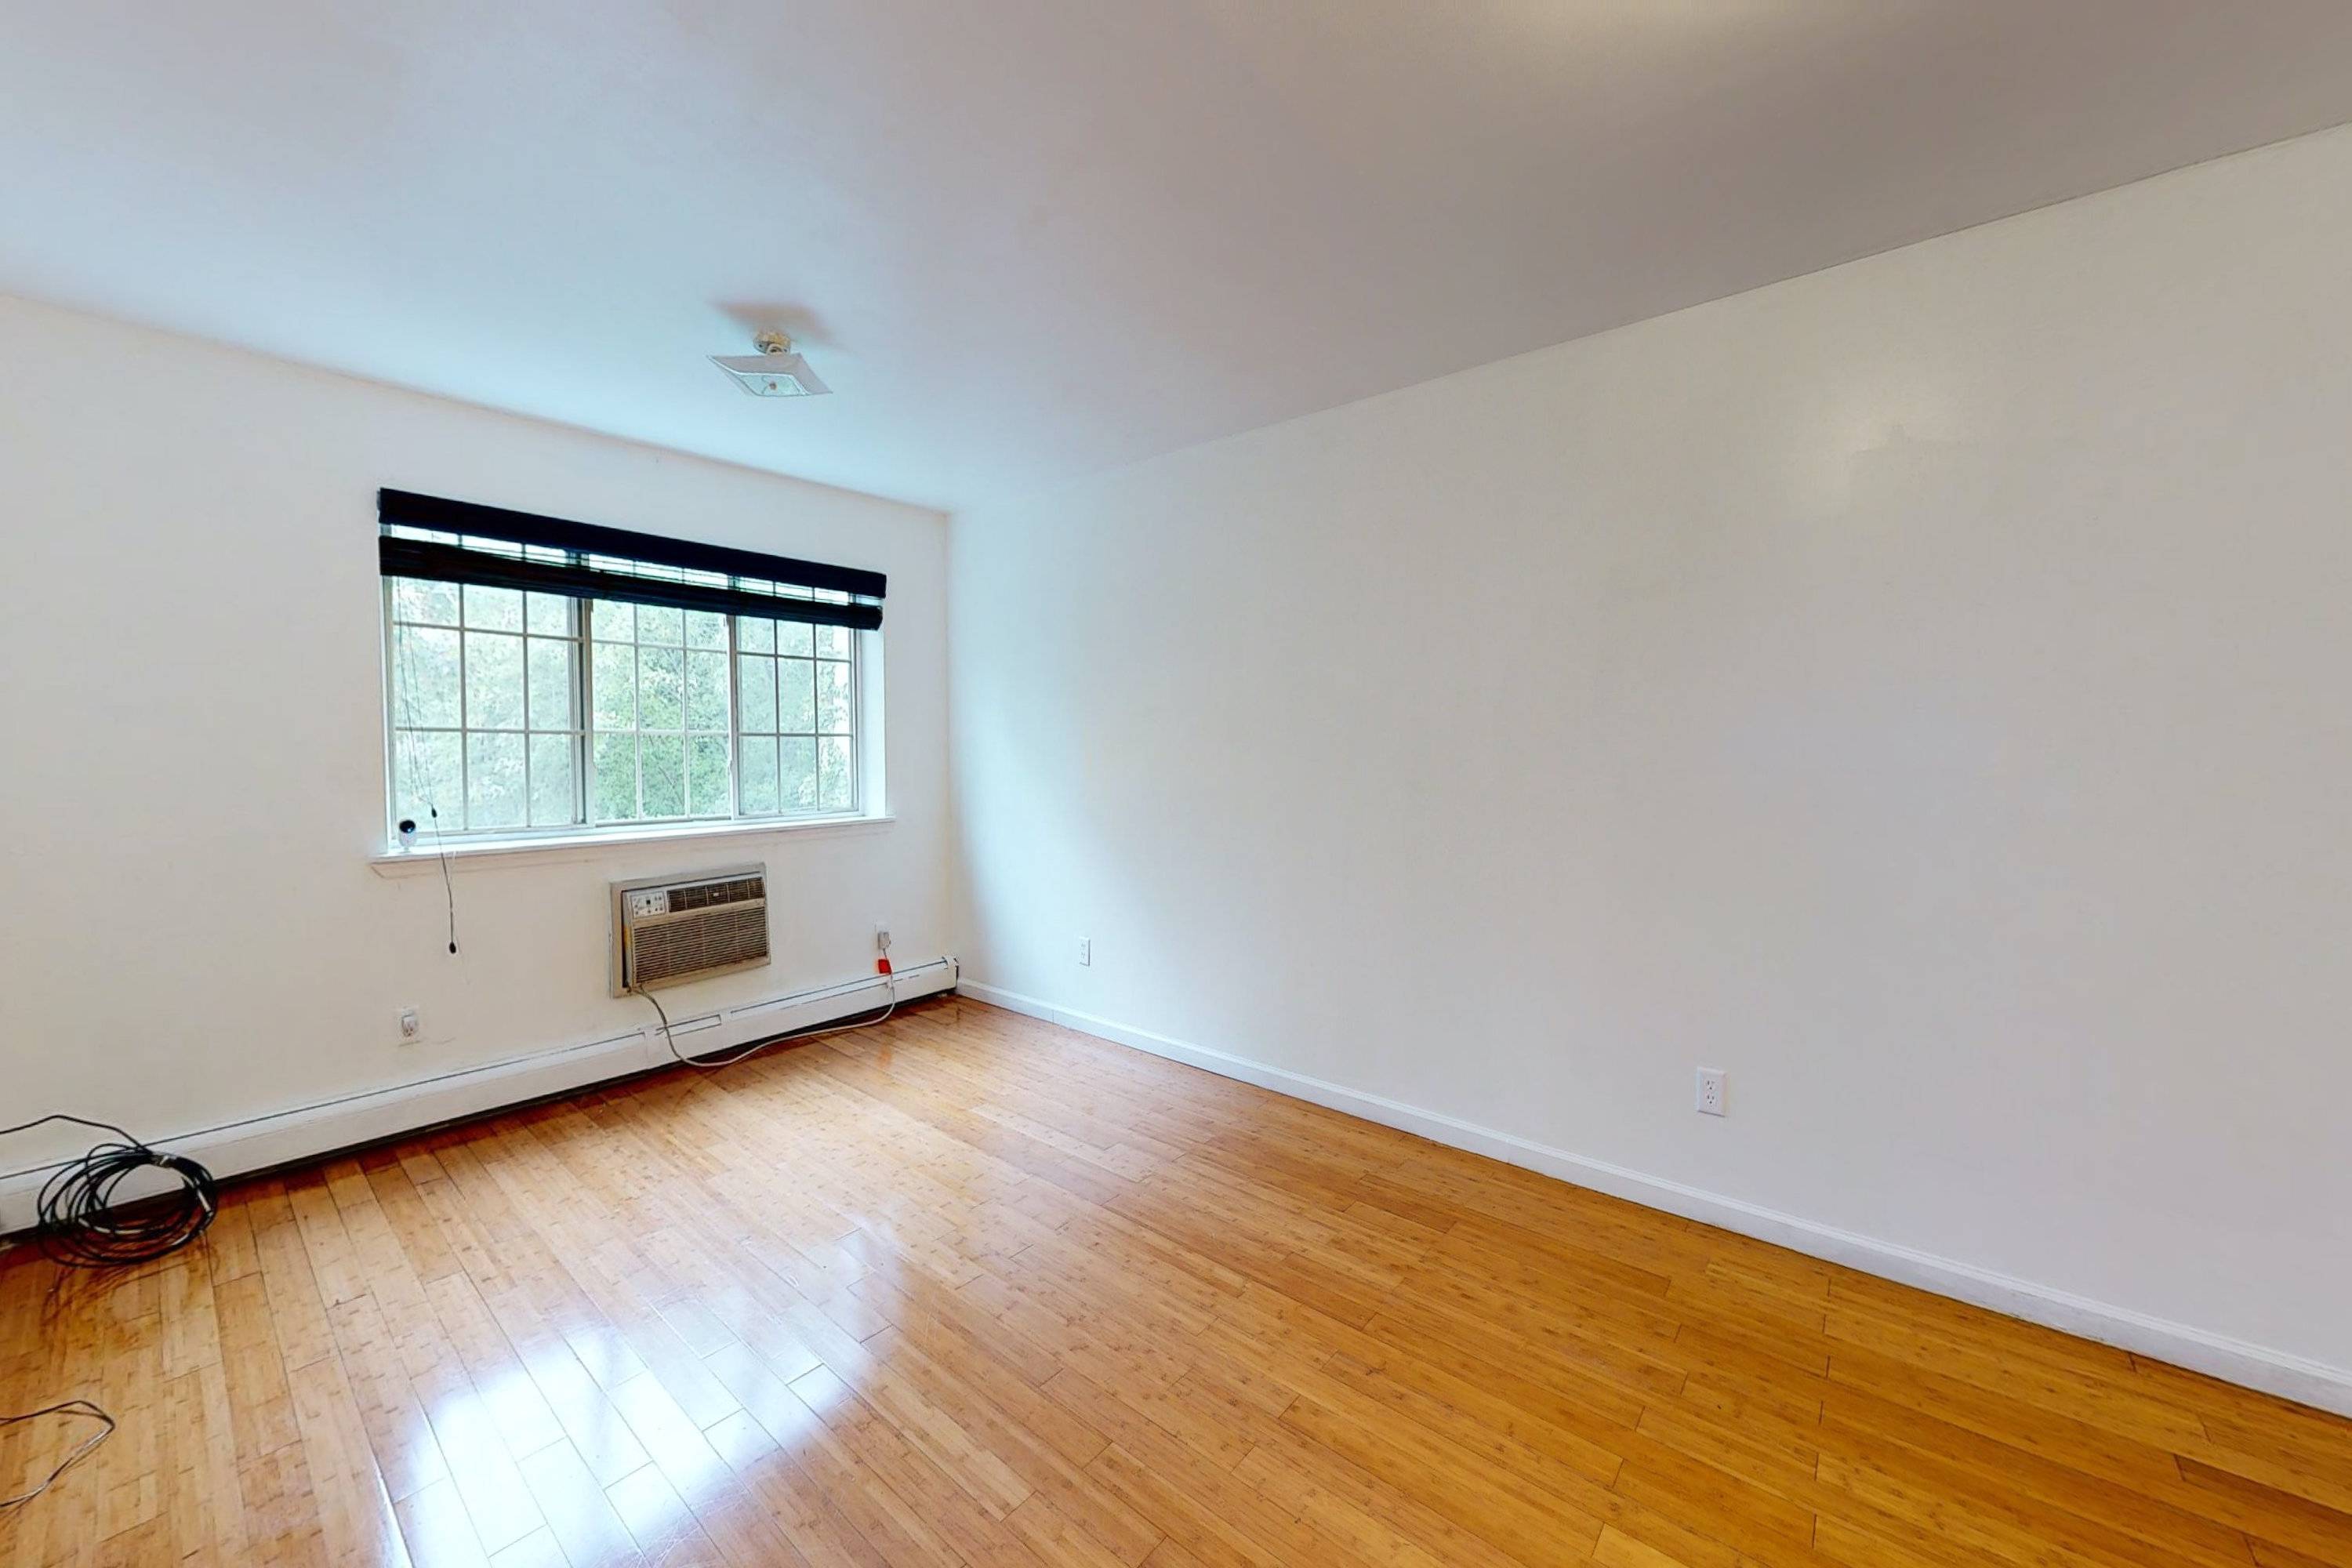 Welcome home to your extra large 3 bedroom, 2 full bath apartment on the Bedford Stuyvesant Bushwick border.